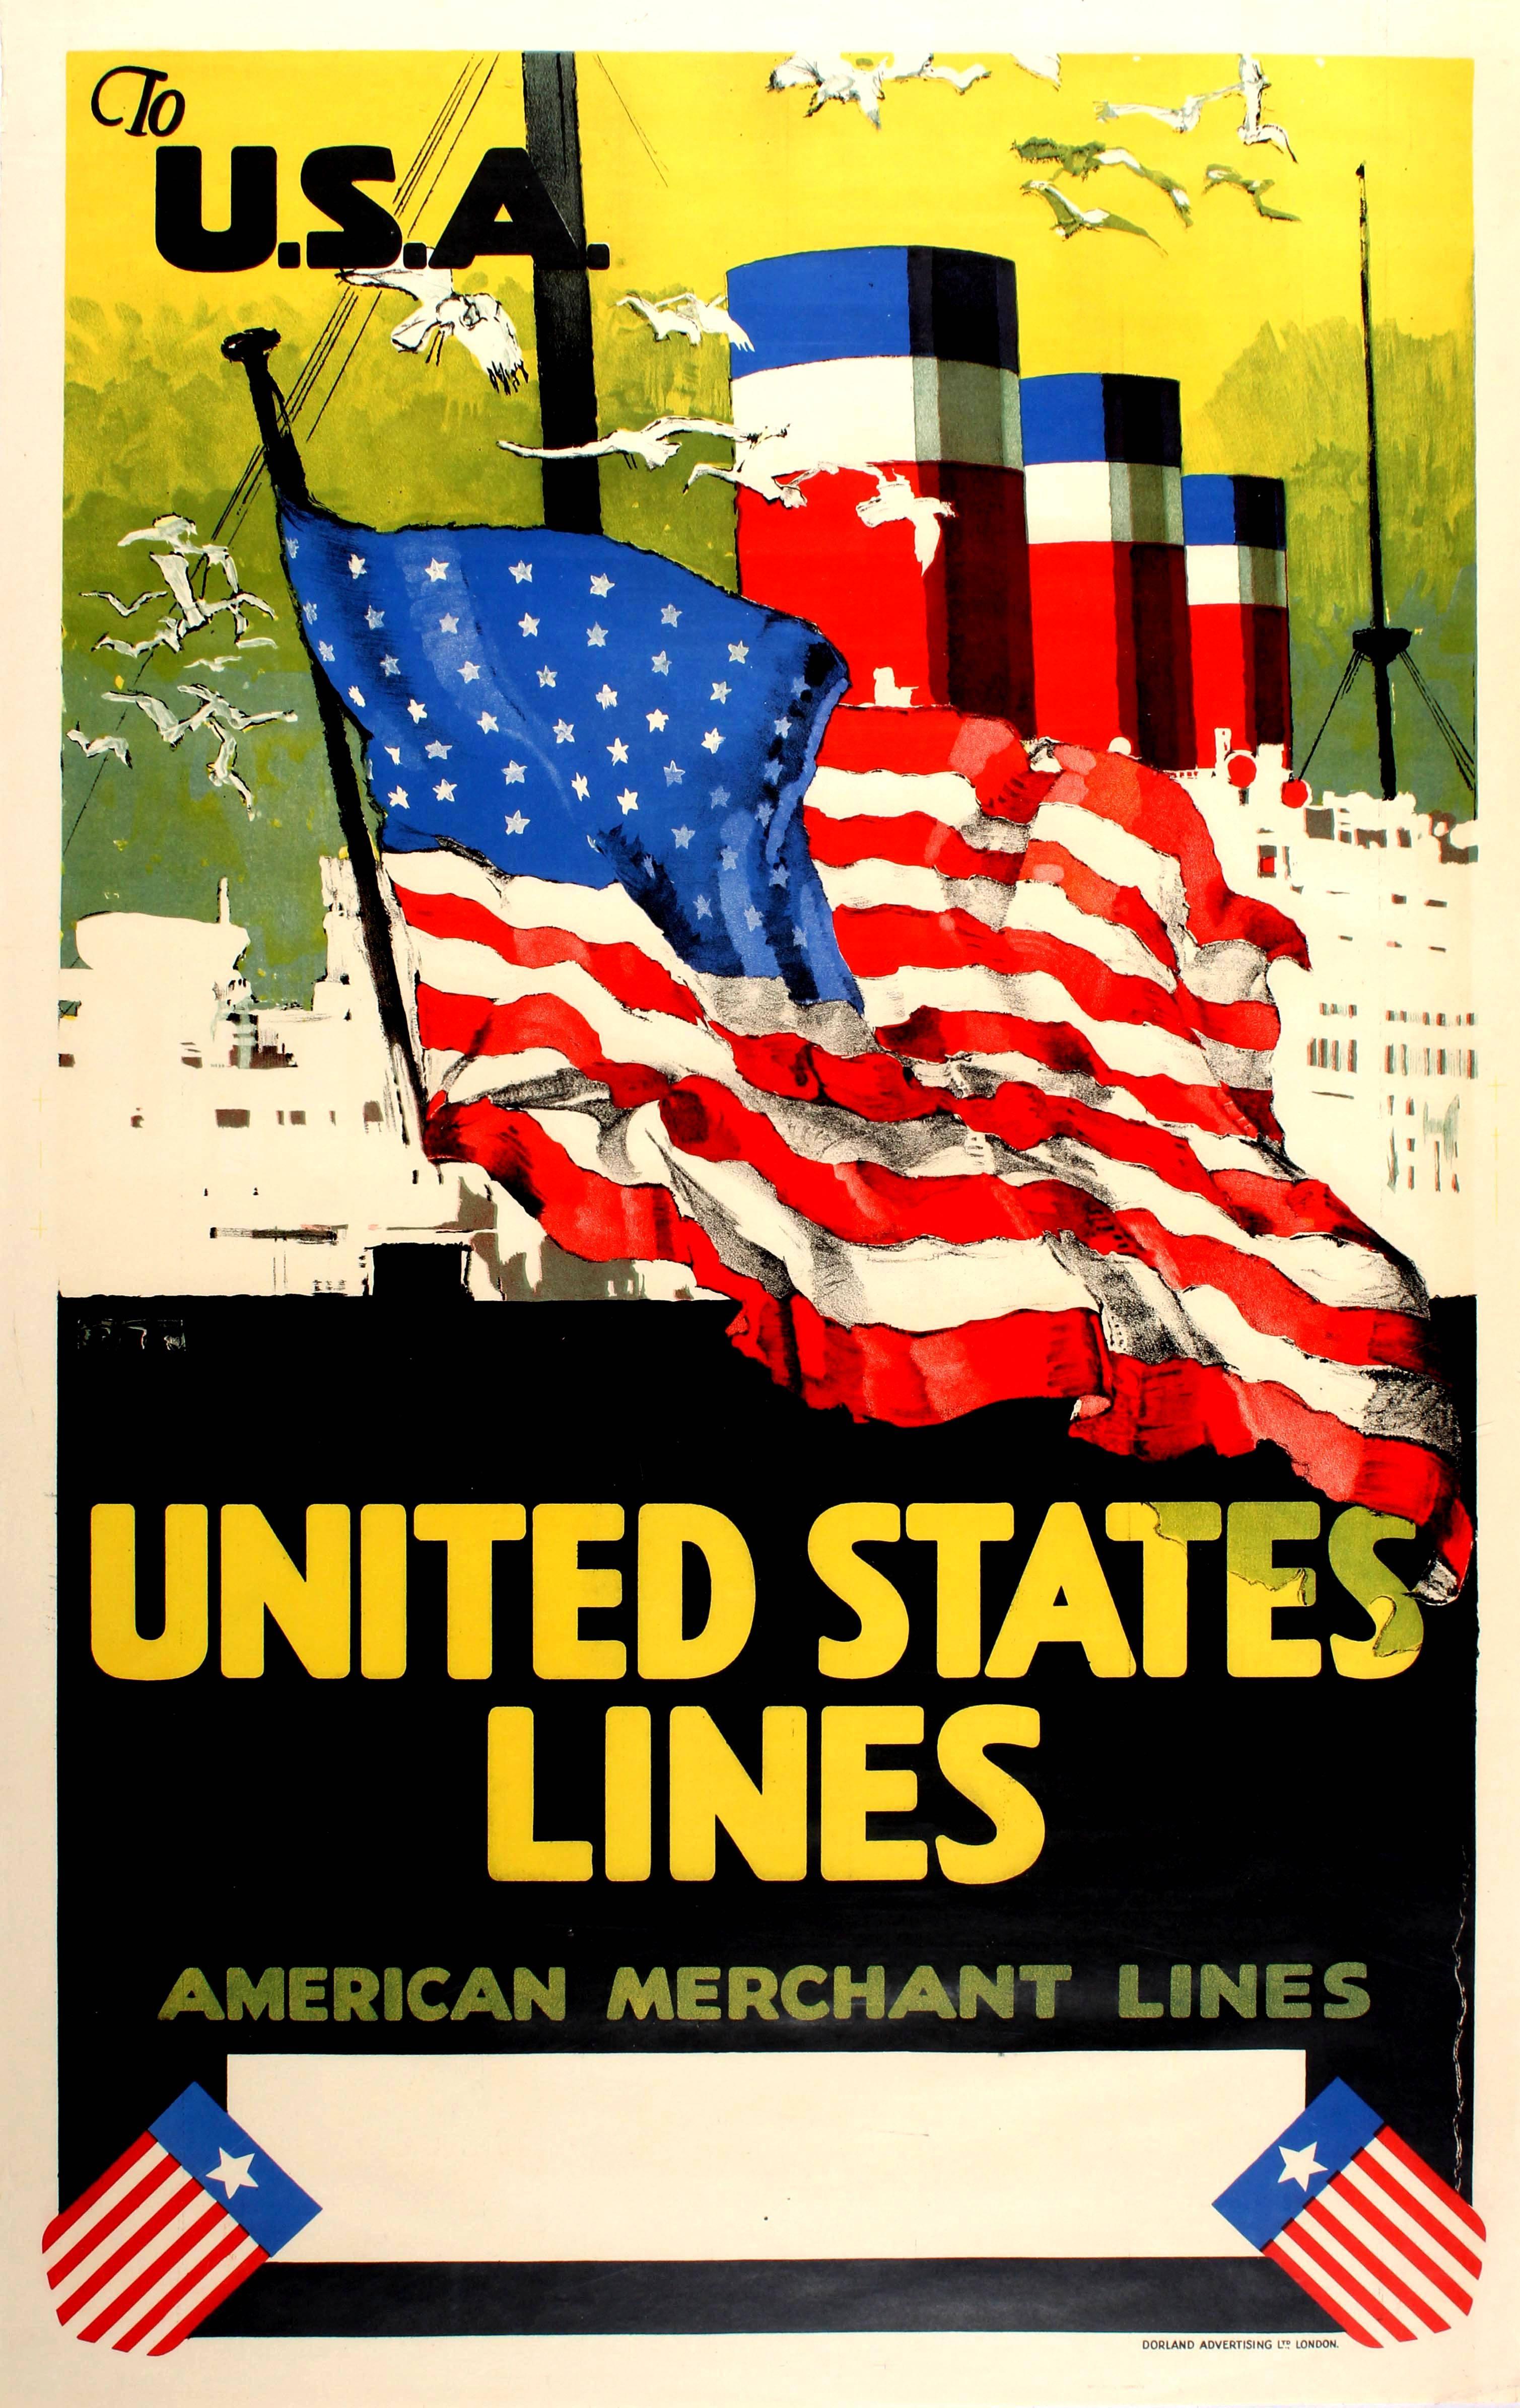 Unknown Print - Original Cruise Ship Poster - To USA United States Lines American Merchant Lines